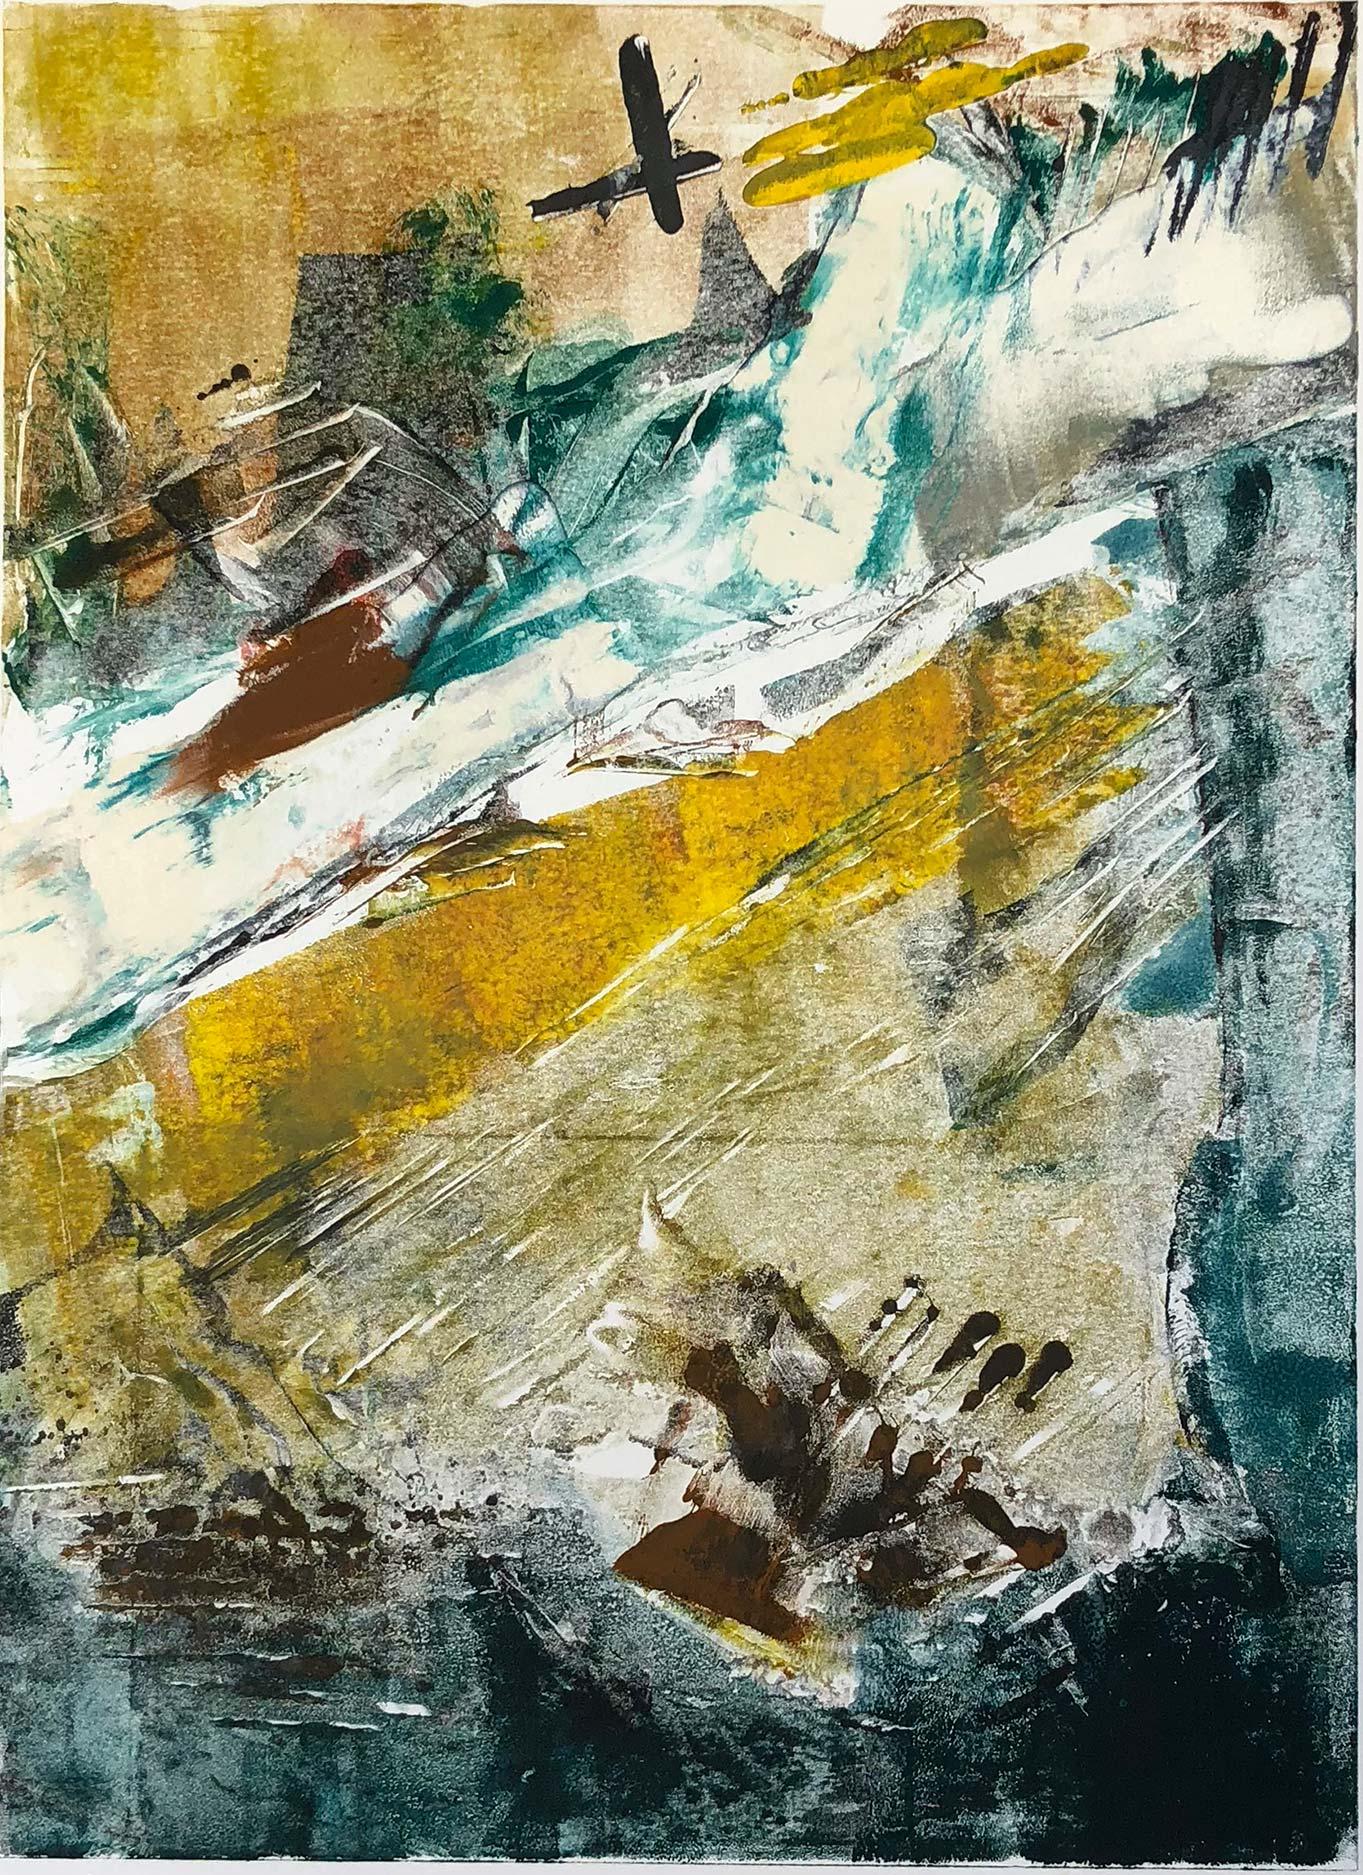 Unique monotype, signed and numbered 1/1.

Artist Robert Roach lives and works in Santa Fe, New Mexico.  His one-of-a-kind, abstract monoprints are inspired by the landscape, climate and light of the American Southwest.  He has been shown in a